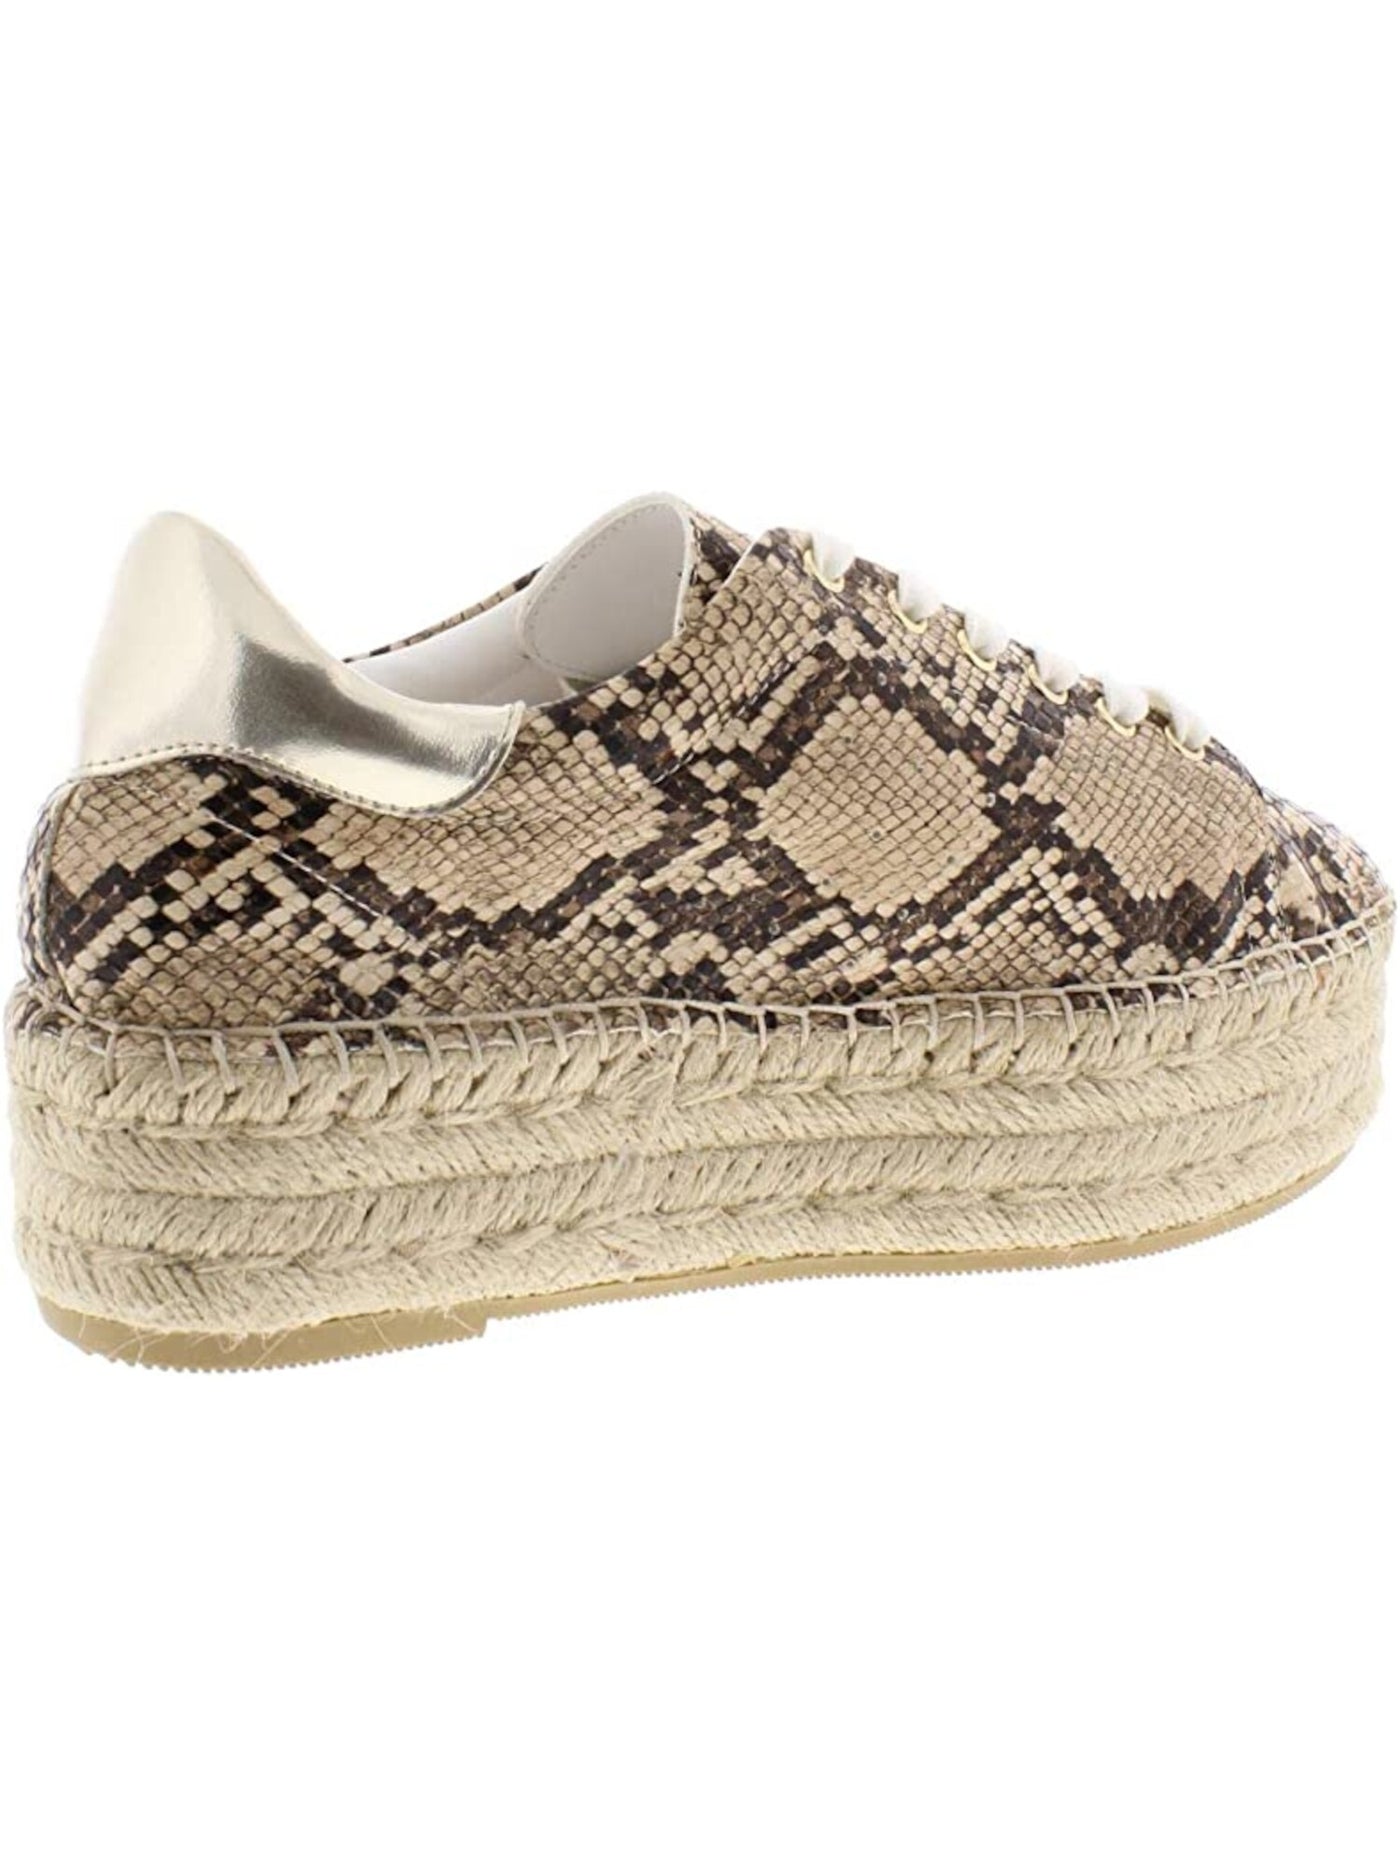 STEVE MADDEN Womens Beige Snake Print Espadrille Parade Round Toe Platform Lace-Up Athletic Sneakers 6.5 M